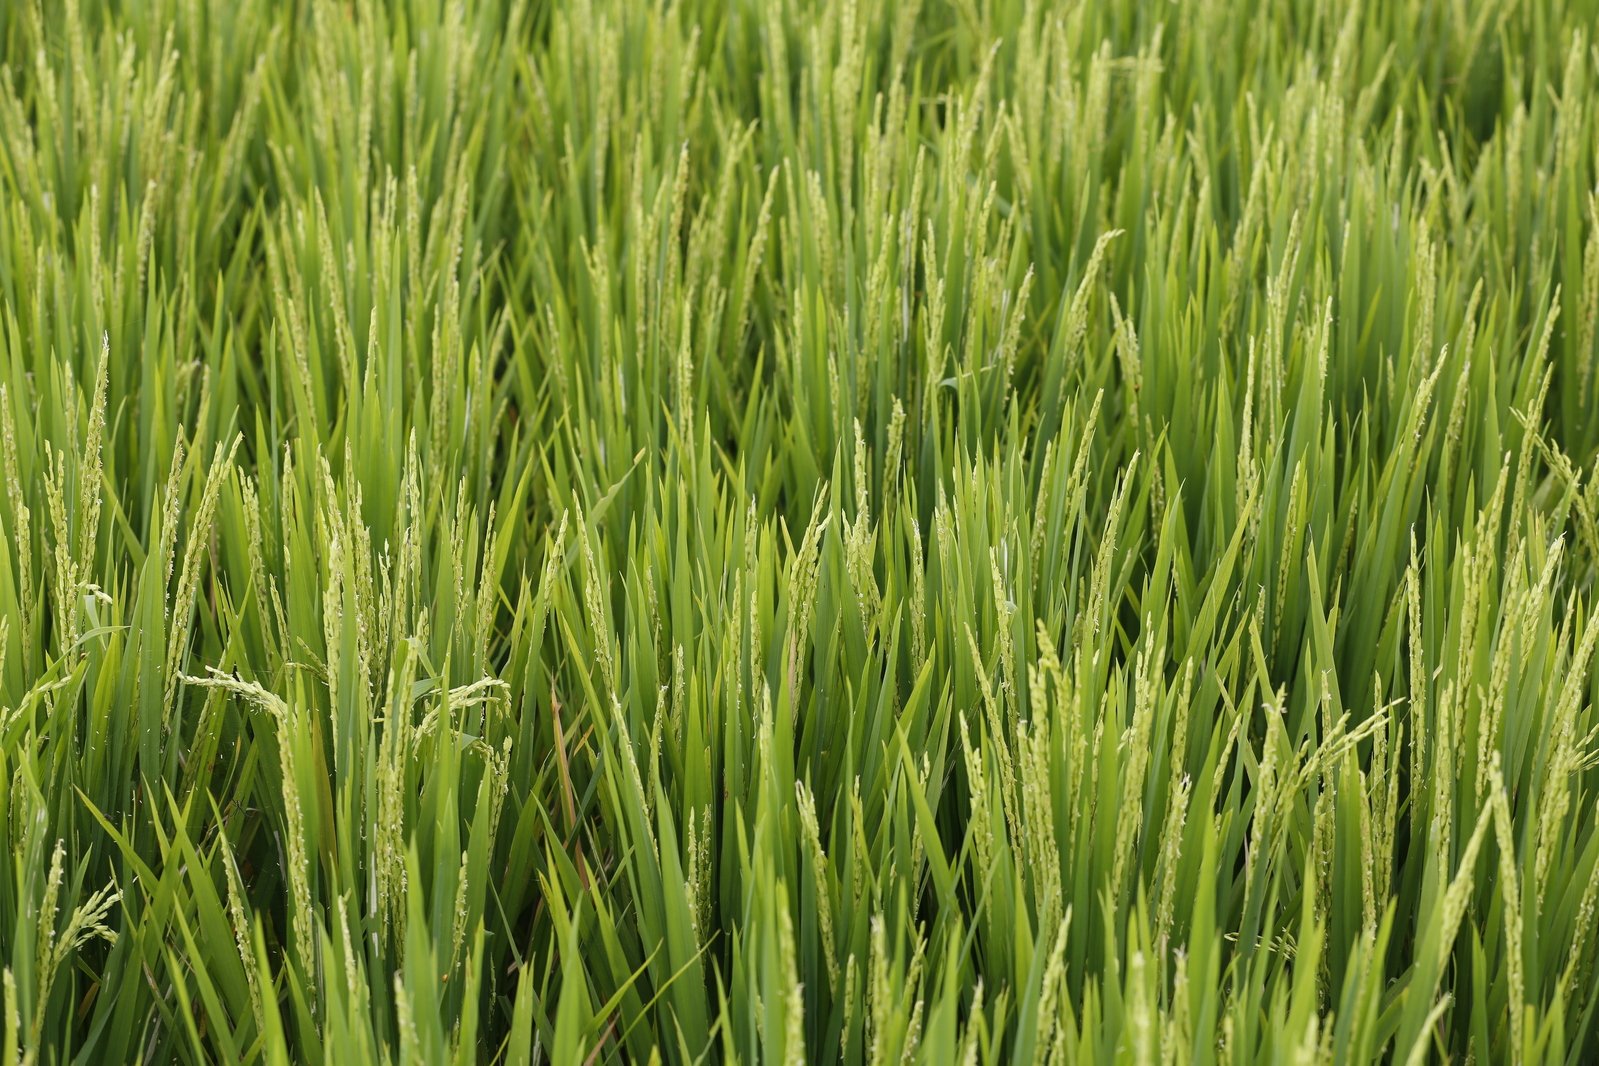 a close up of some grass plants in the daytime